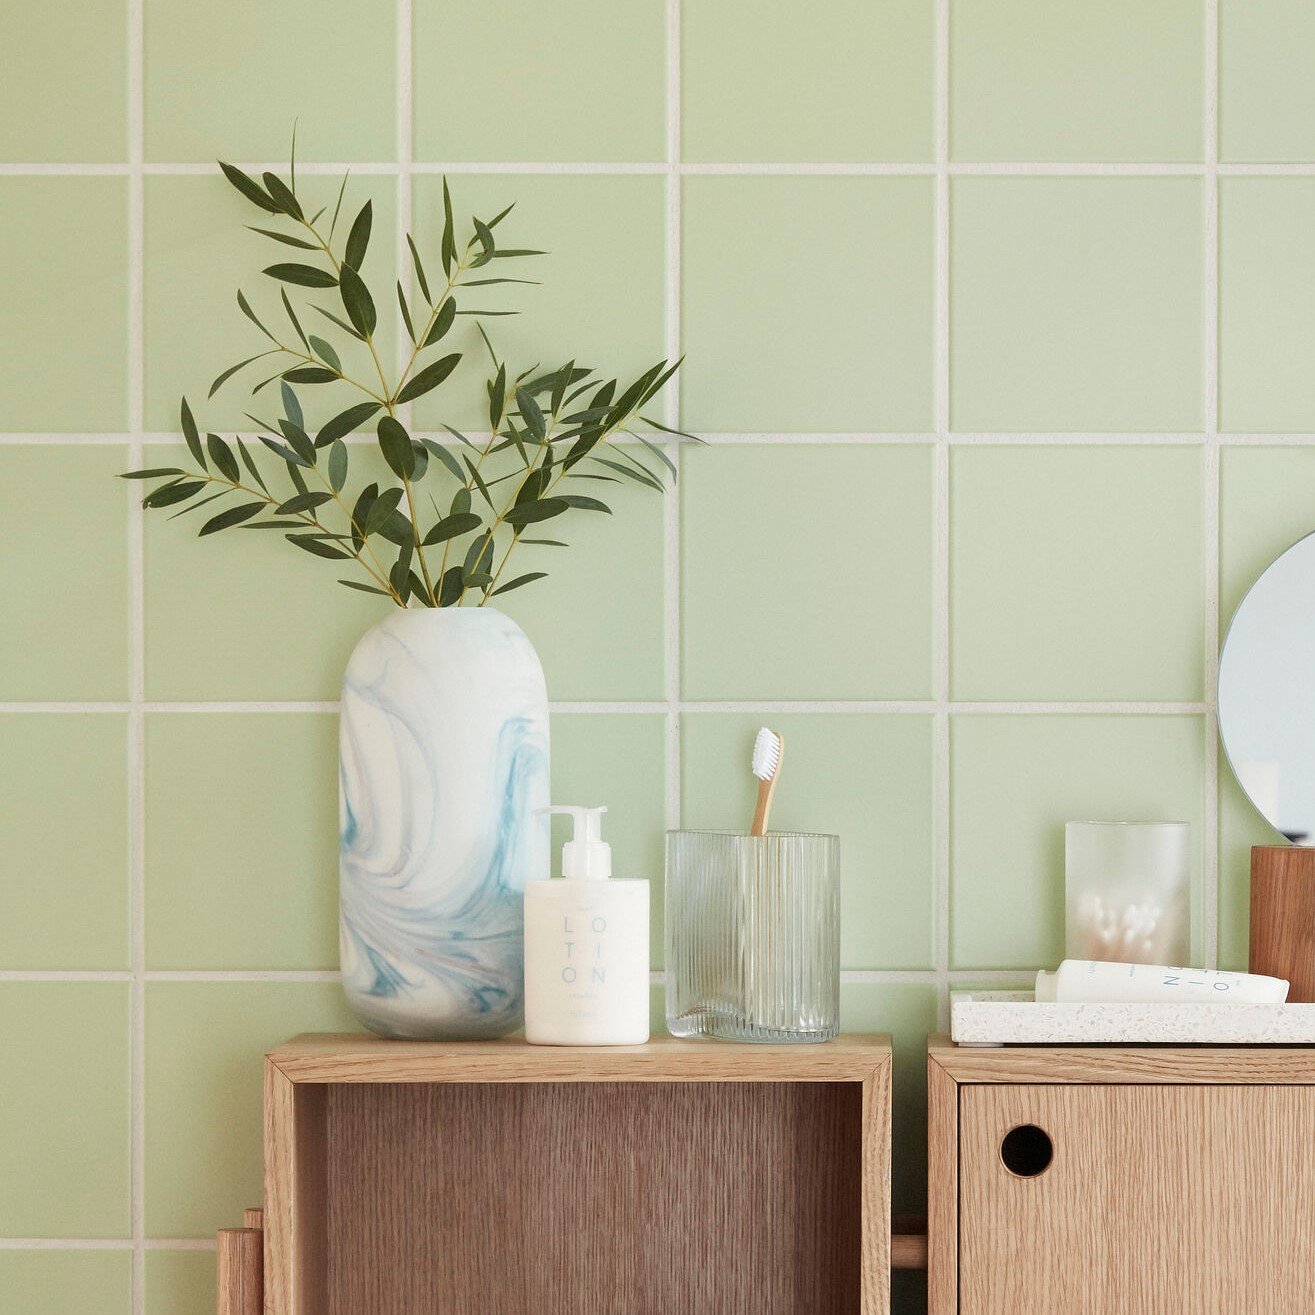 Hubsch Interior Scandi style marbled vases in white and blue glass sitting on bathroom bench with green tile wall